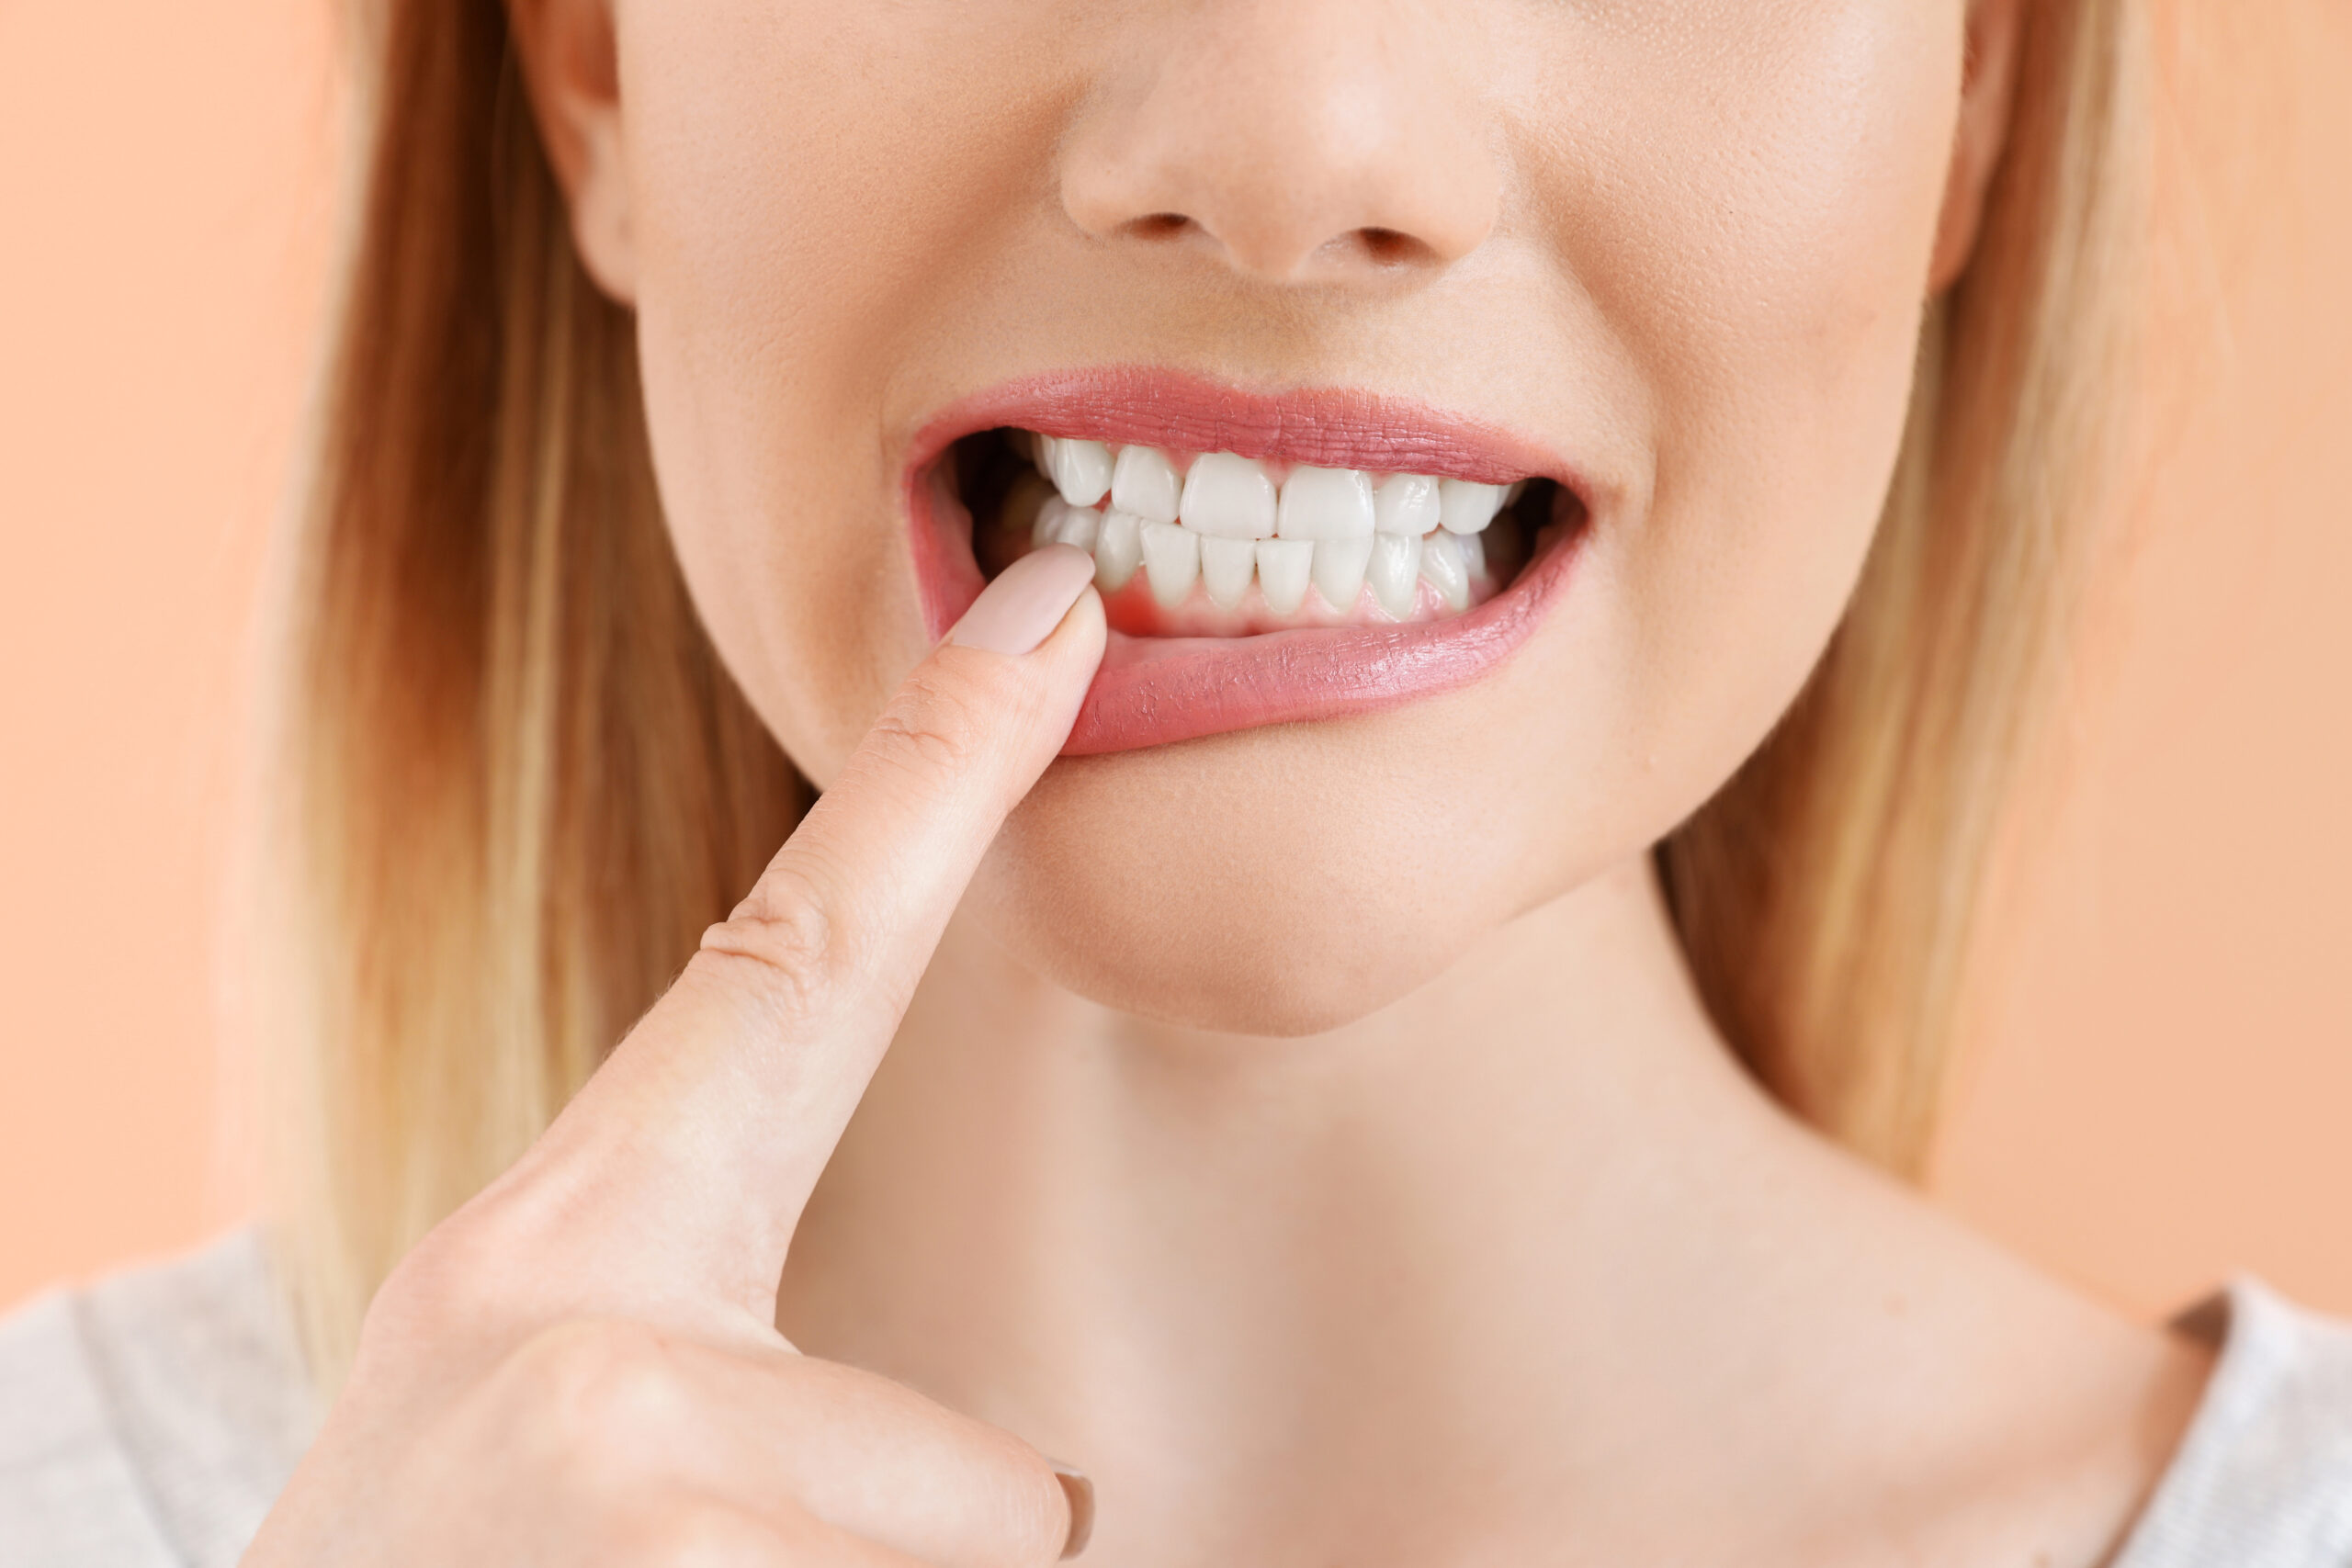 How To Treat Burned Gums From Teeth Whitening